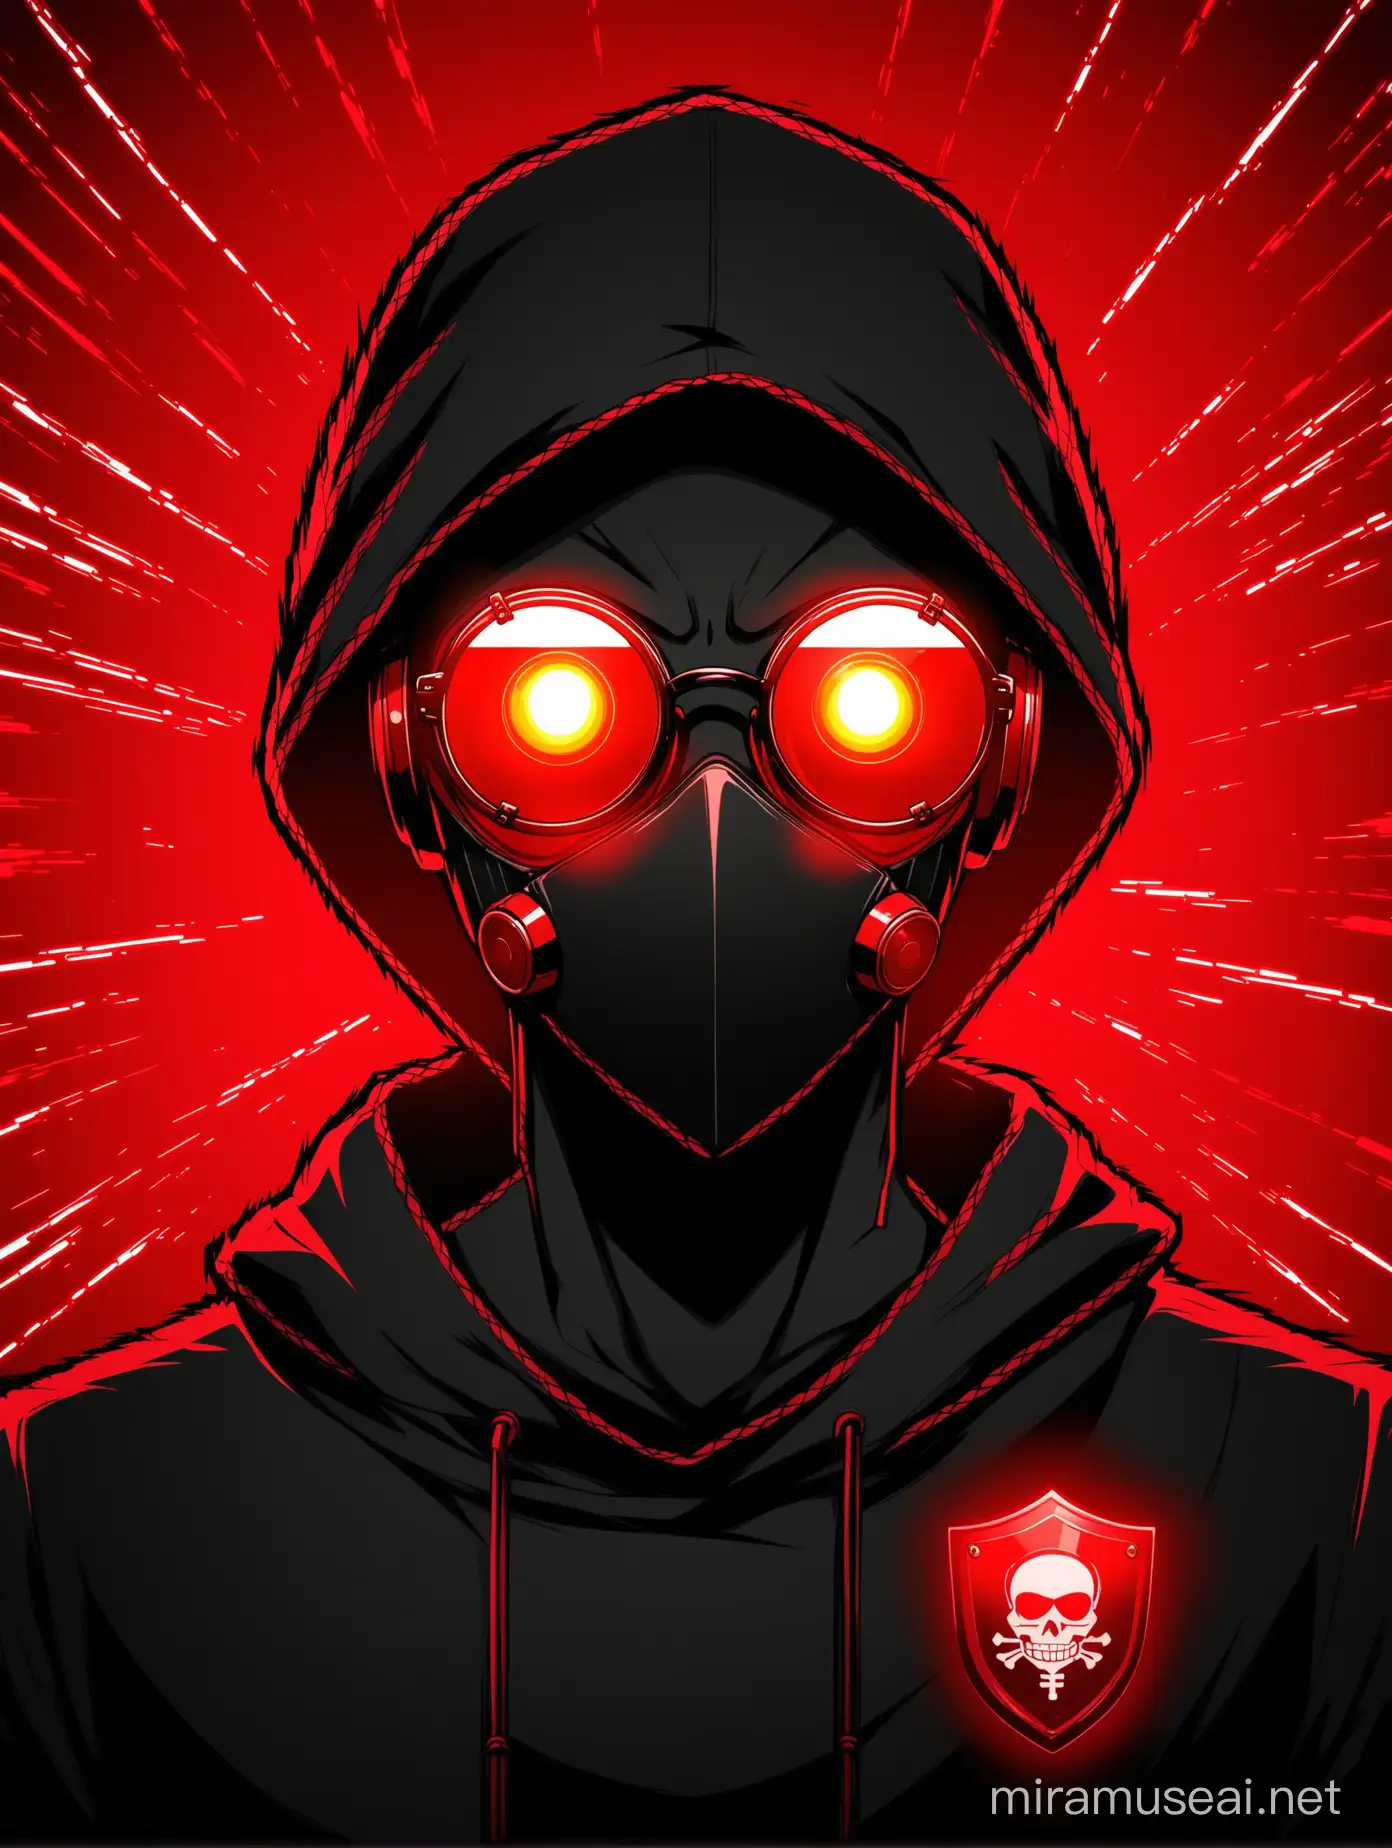 man learn hacking cartoon all black and red  eyes and gaz   dark face and glassess red 
backgroud  like uranium shield
